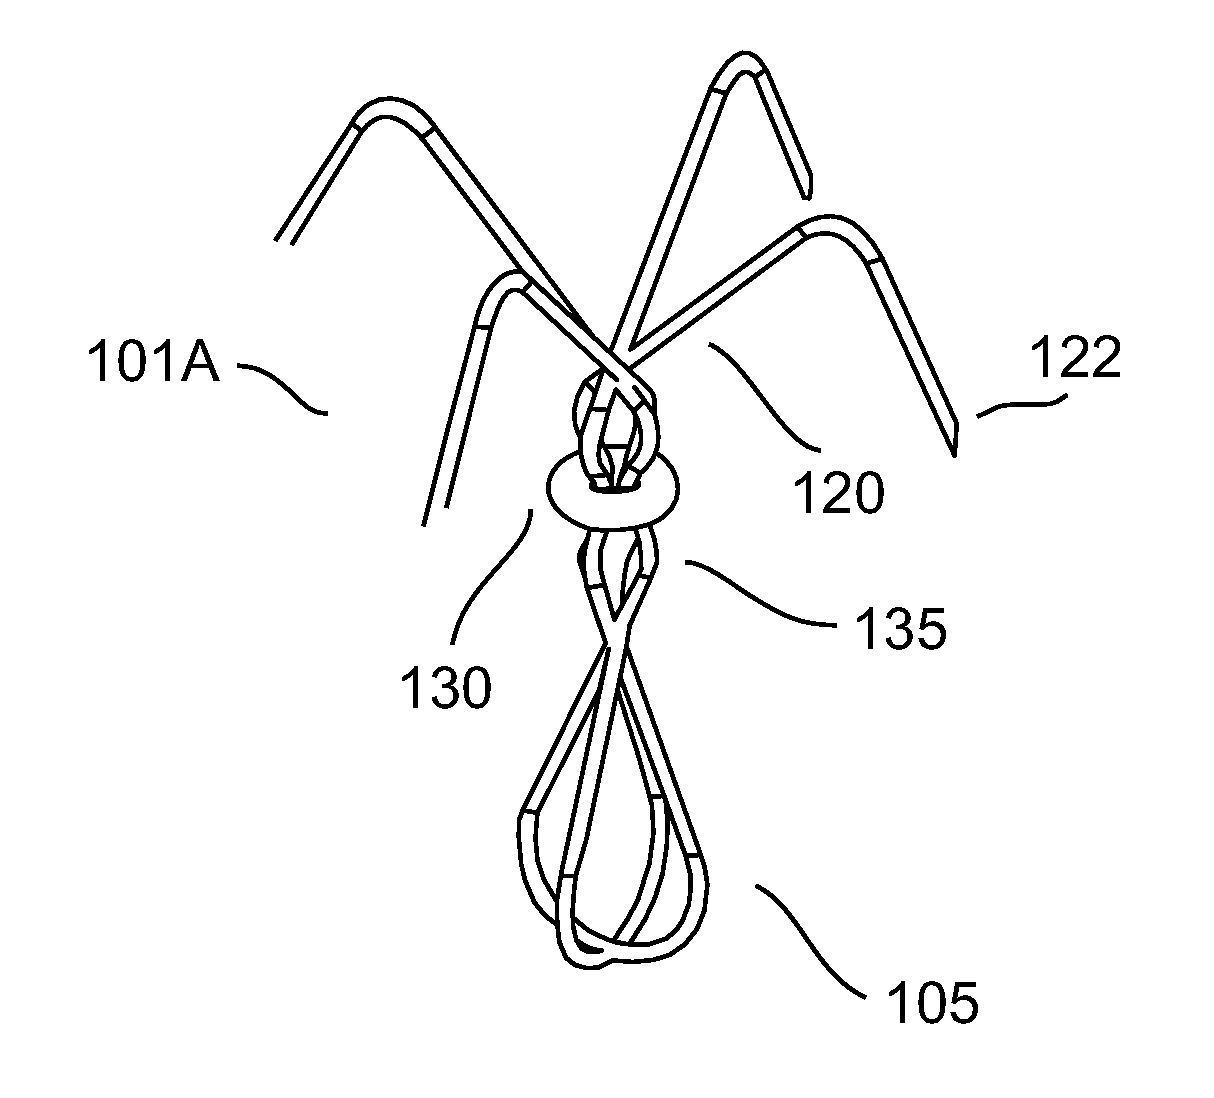 Biodegradable blood vessel occlusion and narrowing